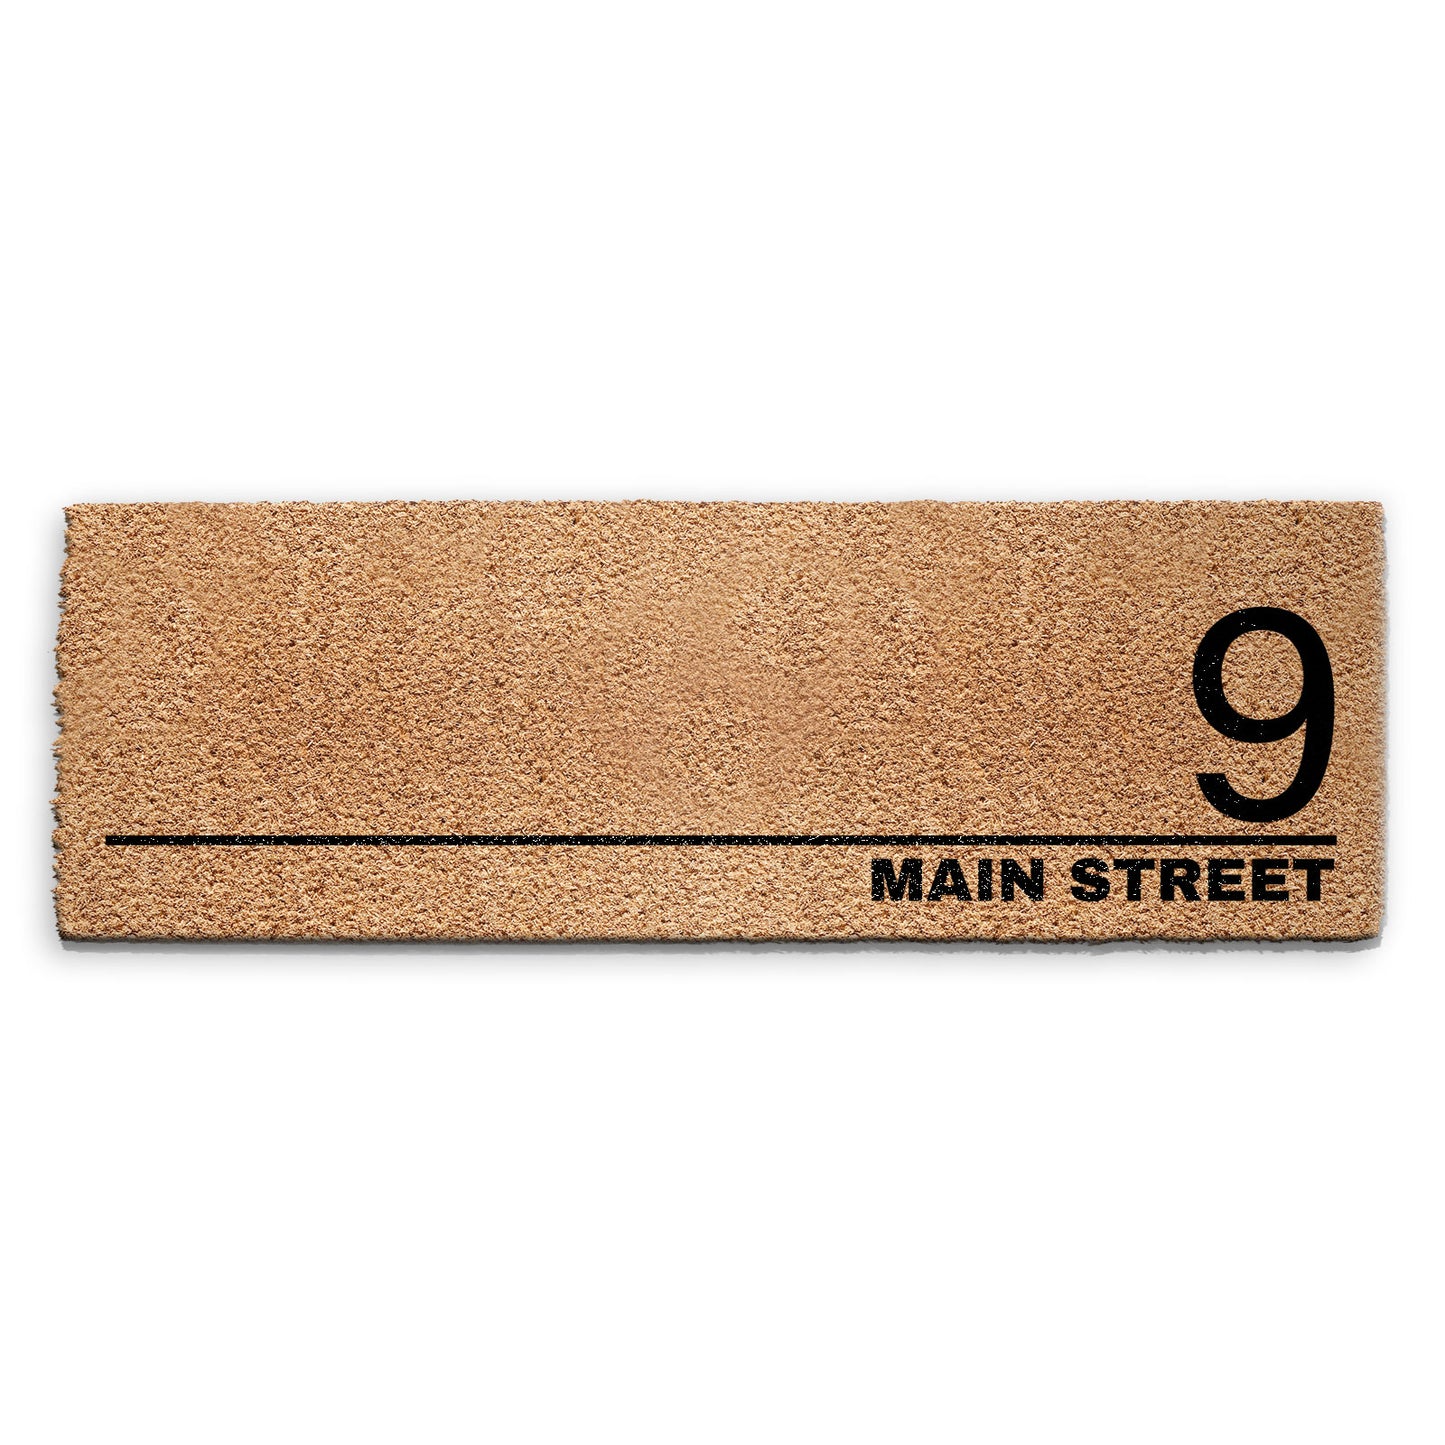 Personalised Doormat with Street Name and House Number